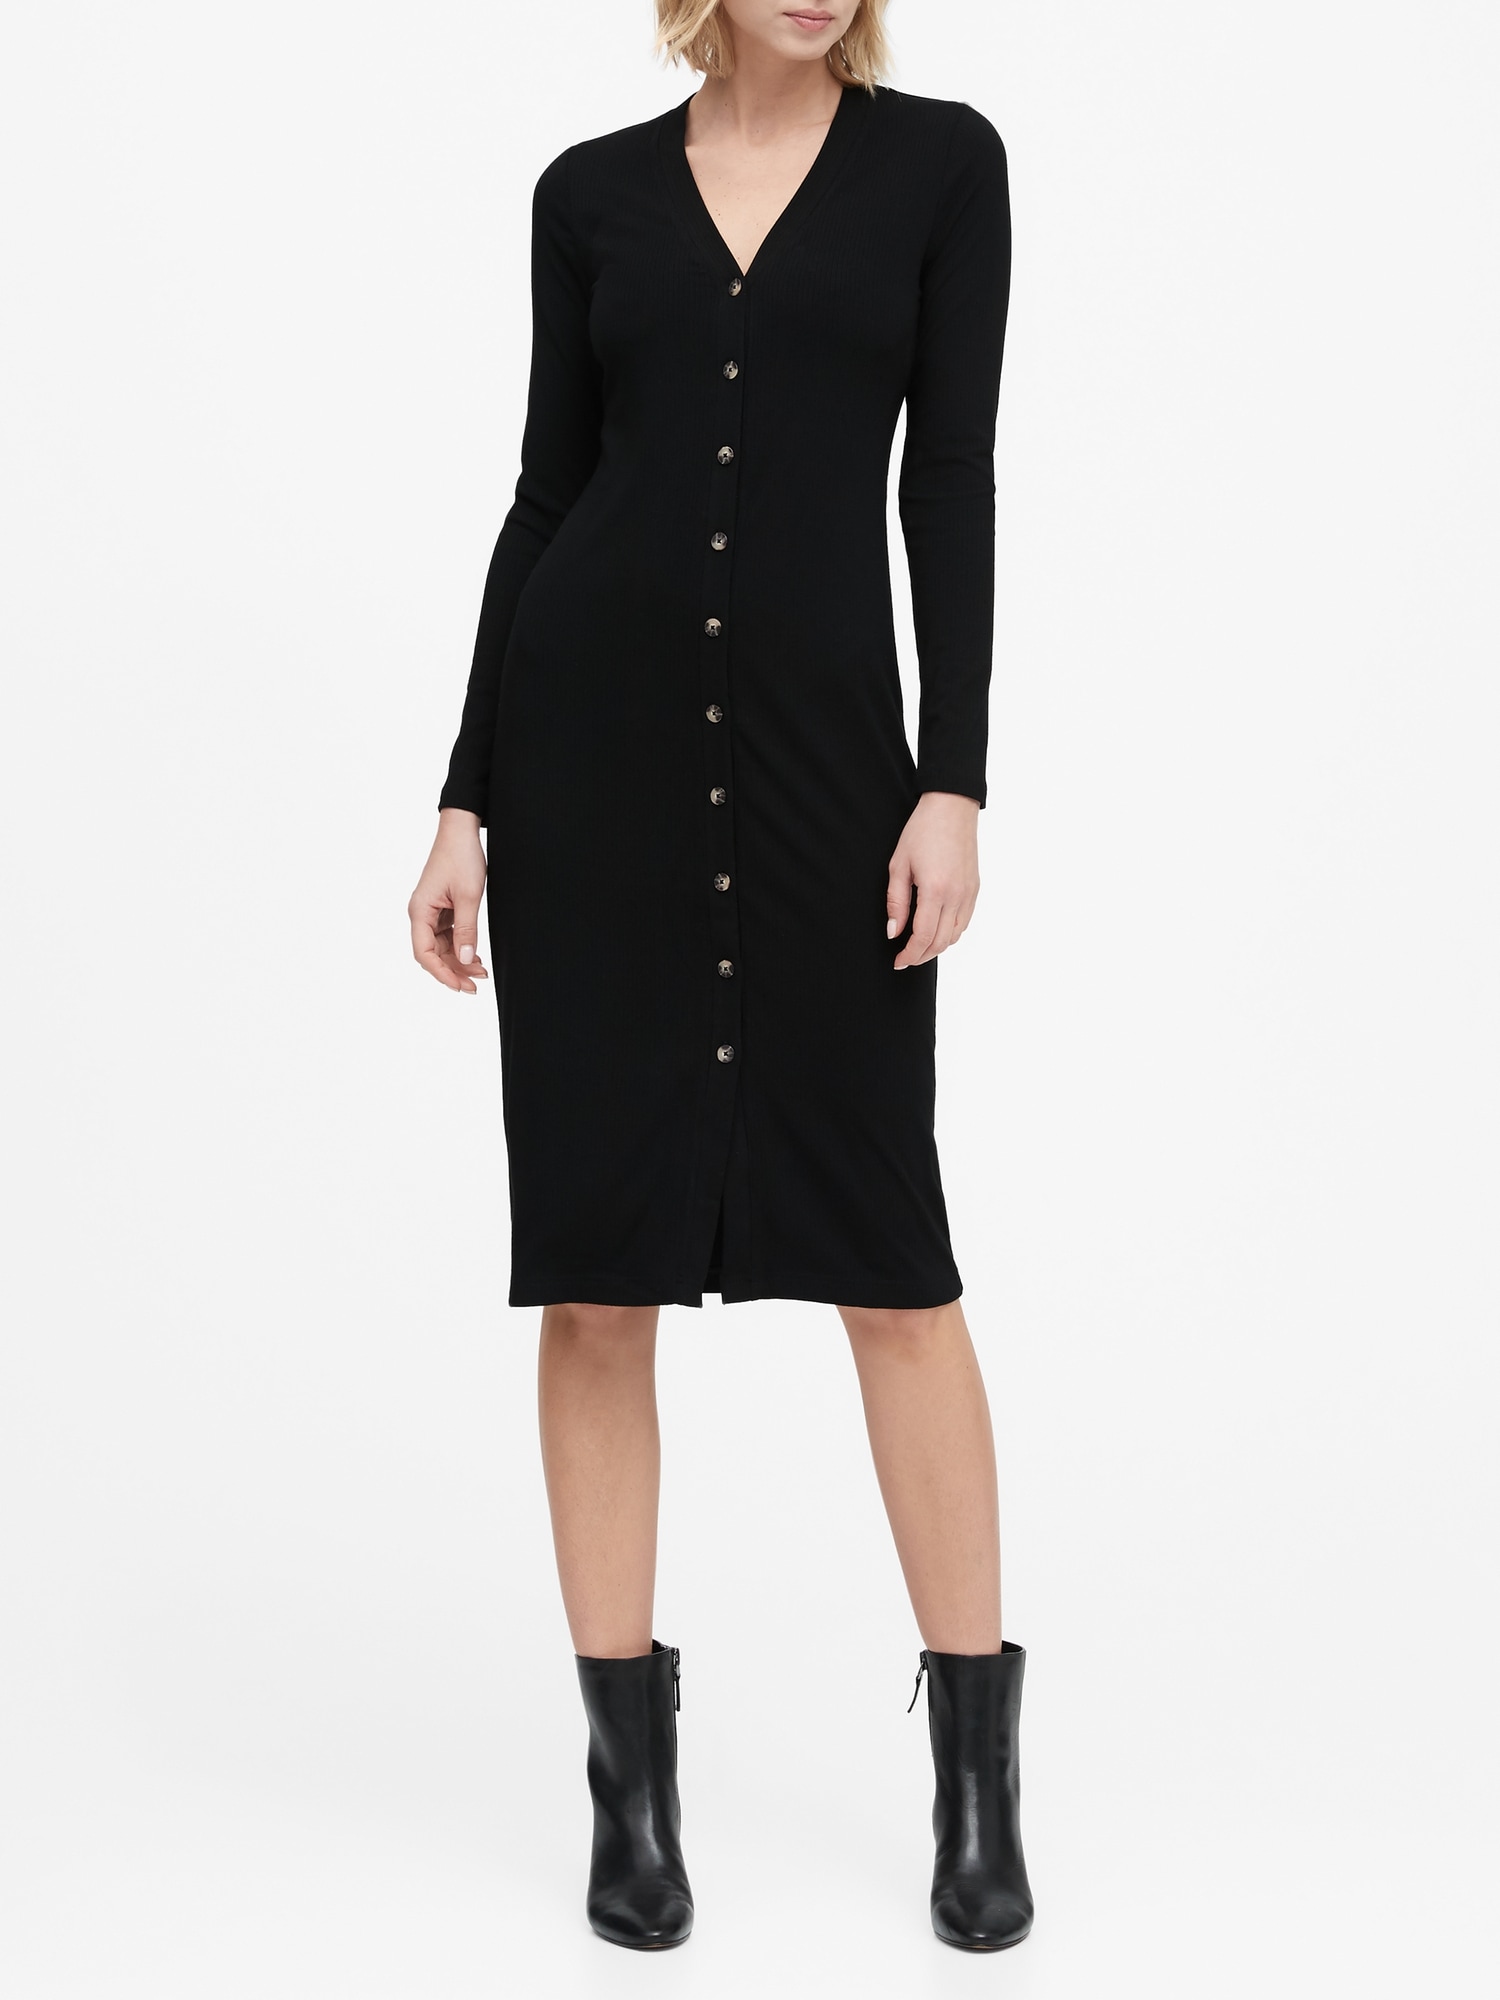 Ribbed Button-Down Dress